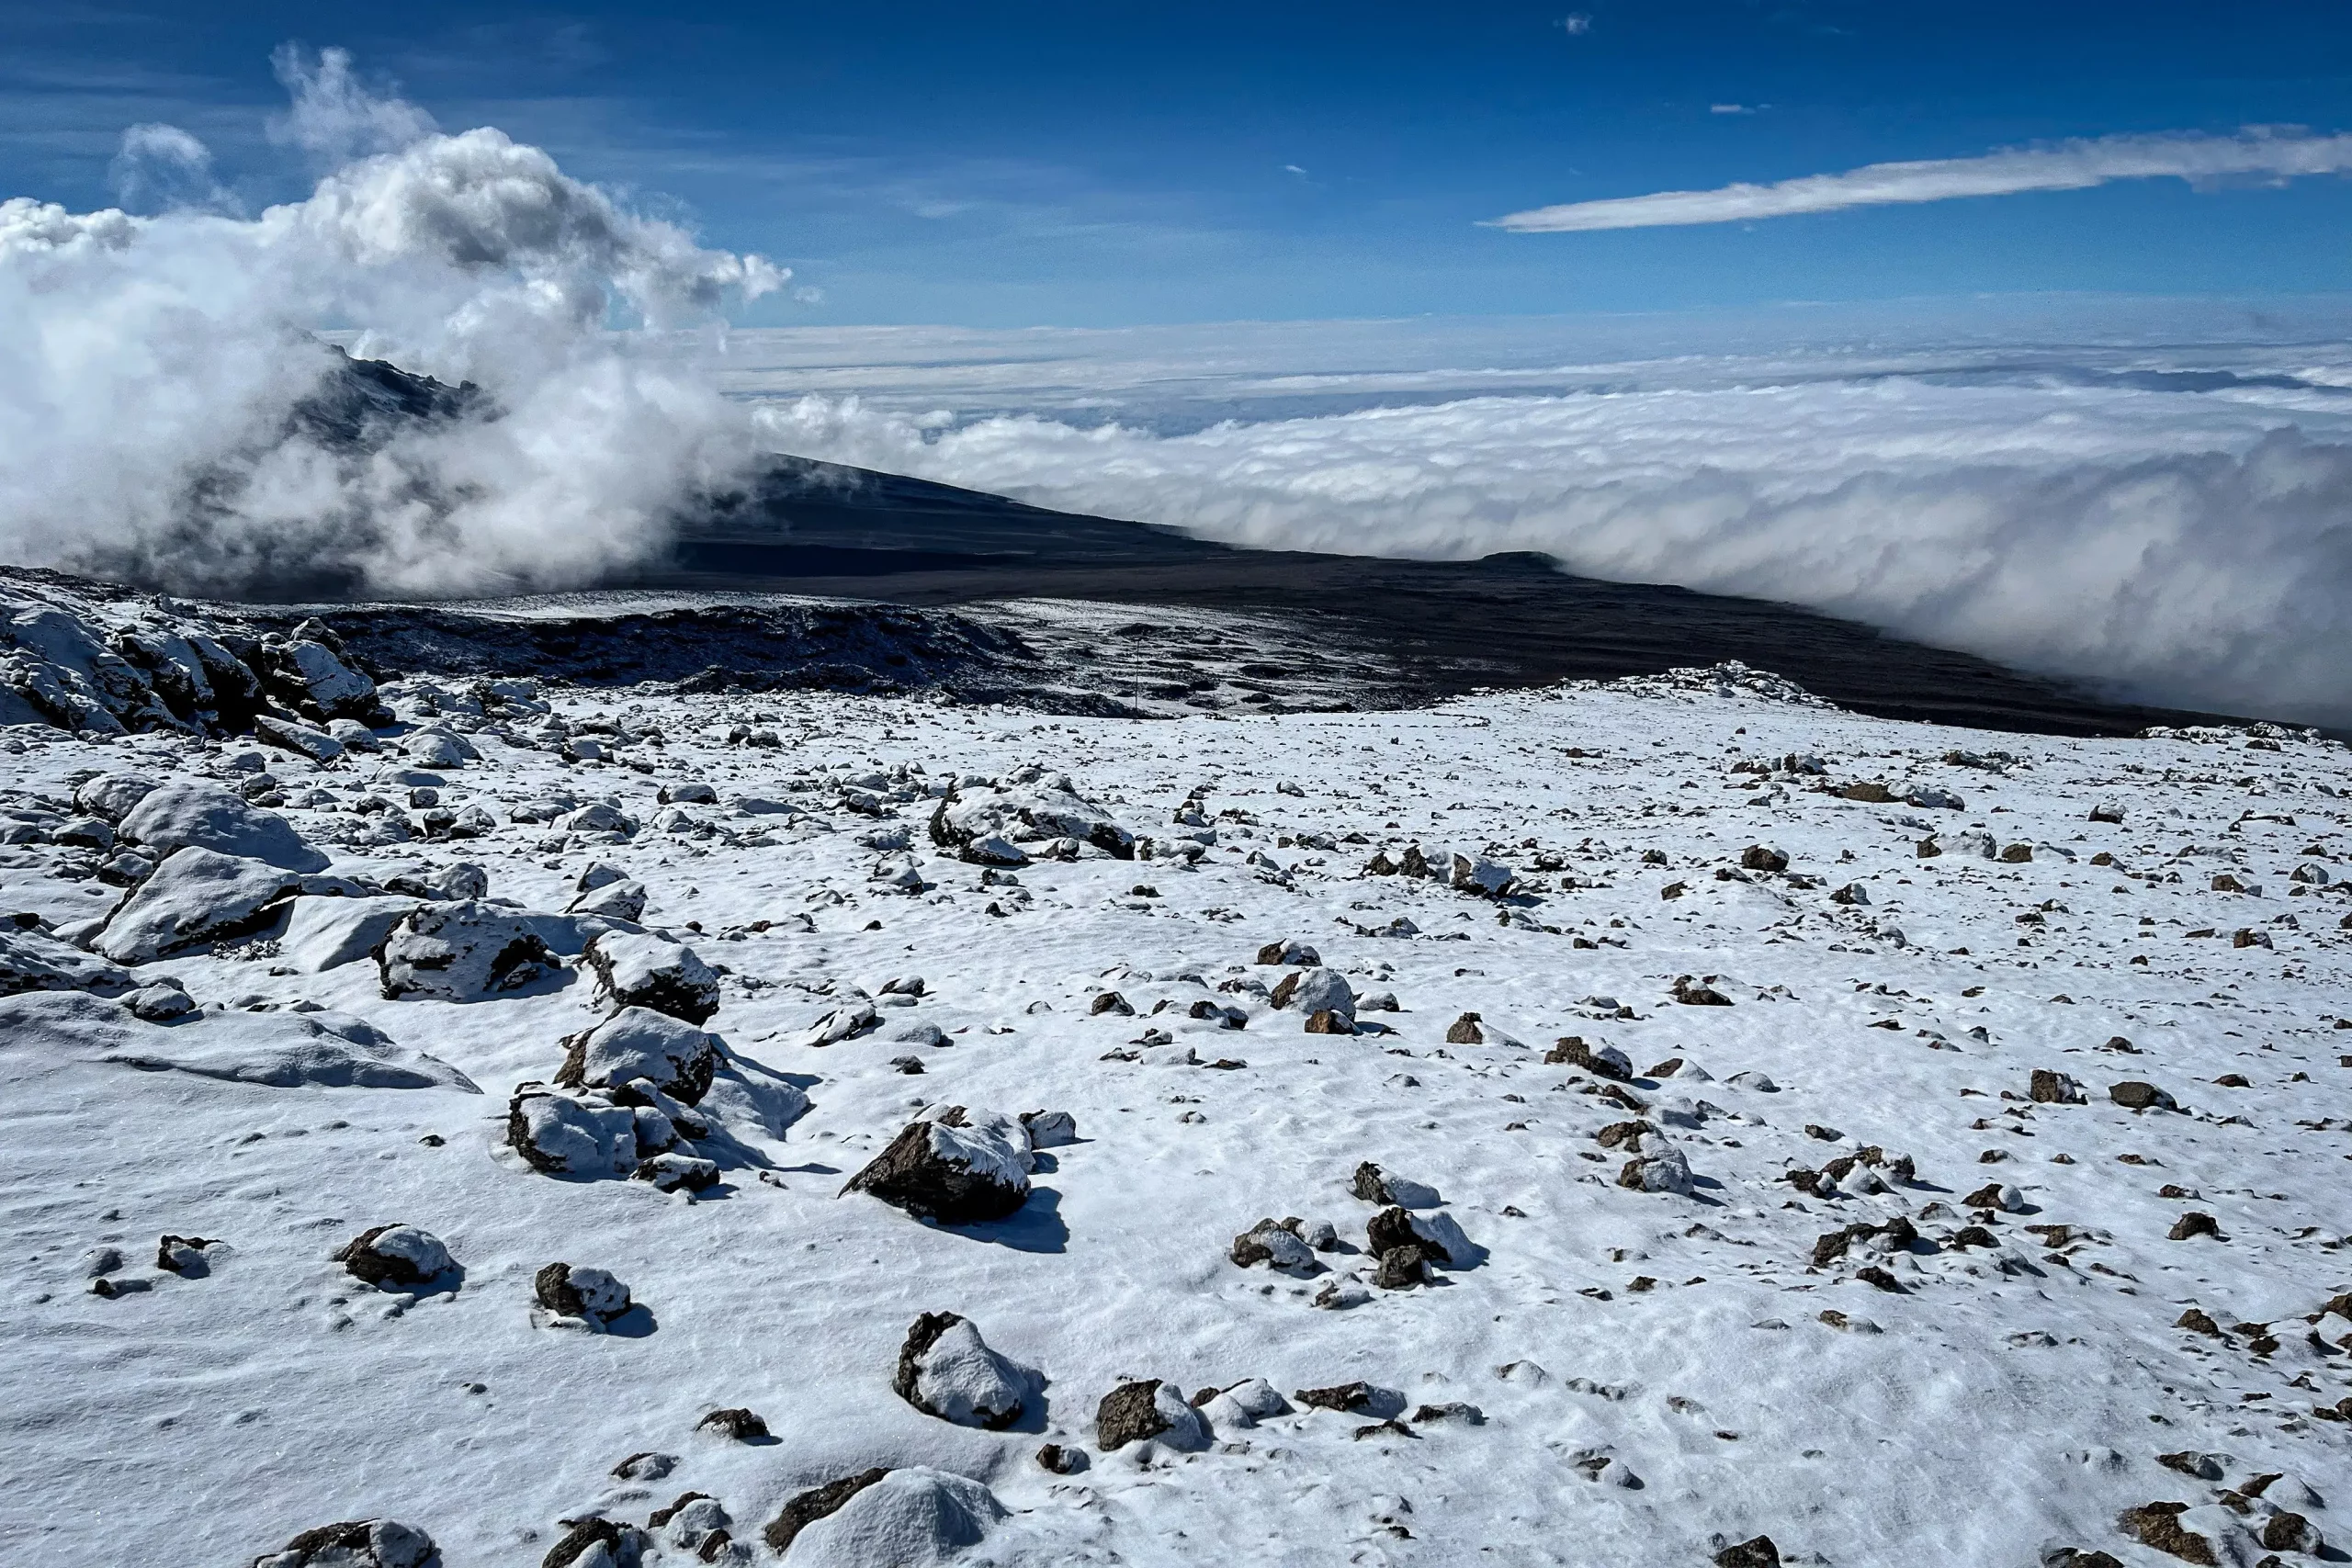 the magnificent view of snow and clouds at Kilimanjaro peak after trekking for 5 days